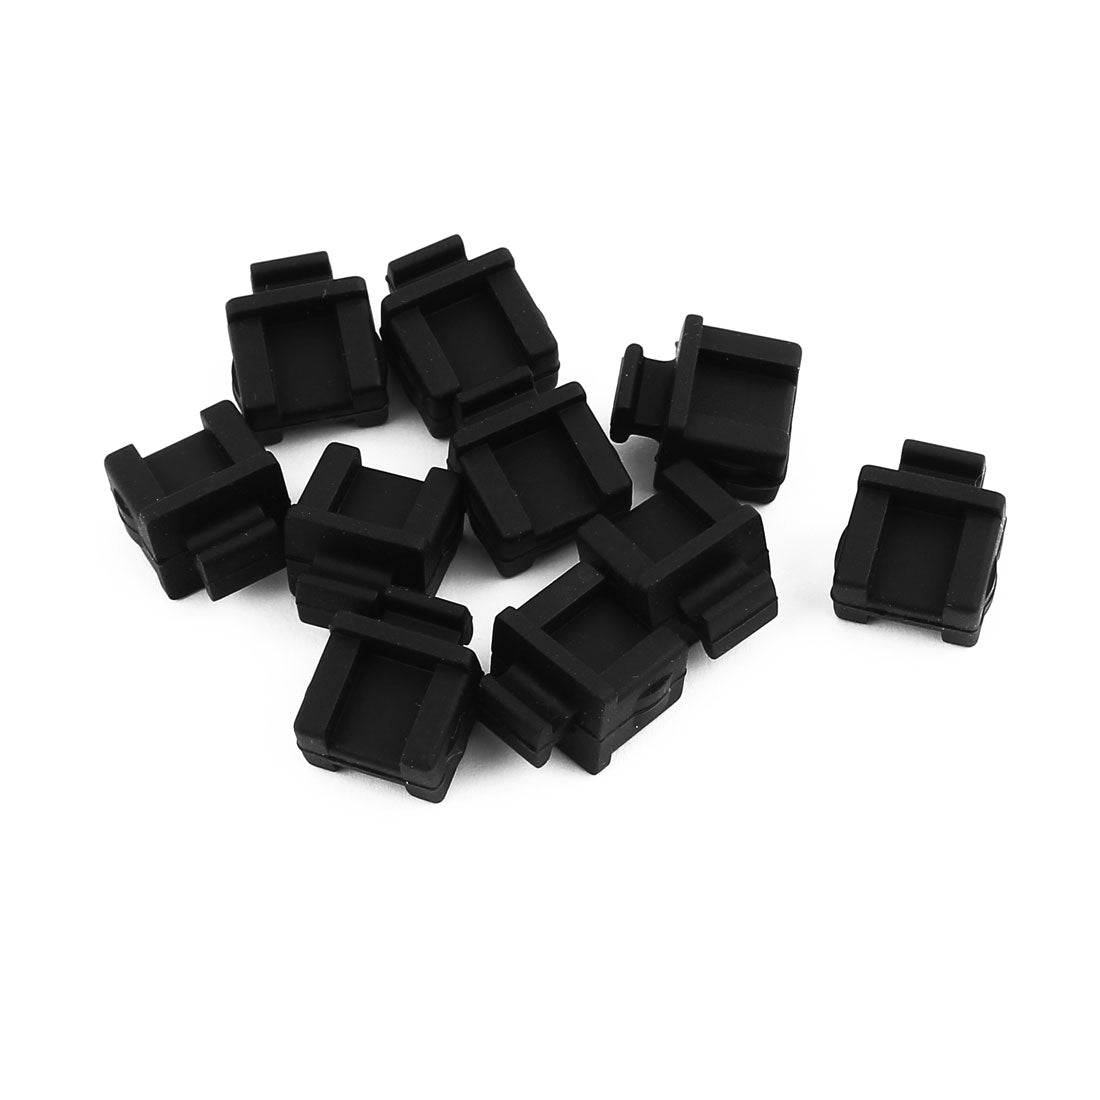 uxcell Uxcell 10Pcs SFP-B Black Silicone Anti-dust Stopper/Plug for Protect Data Port Of Devices